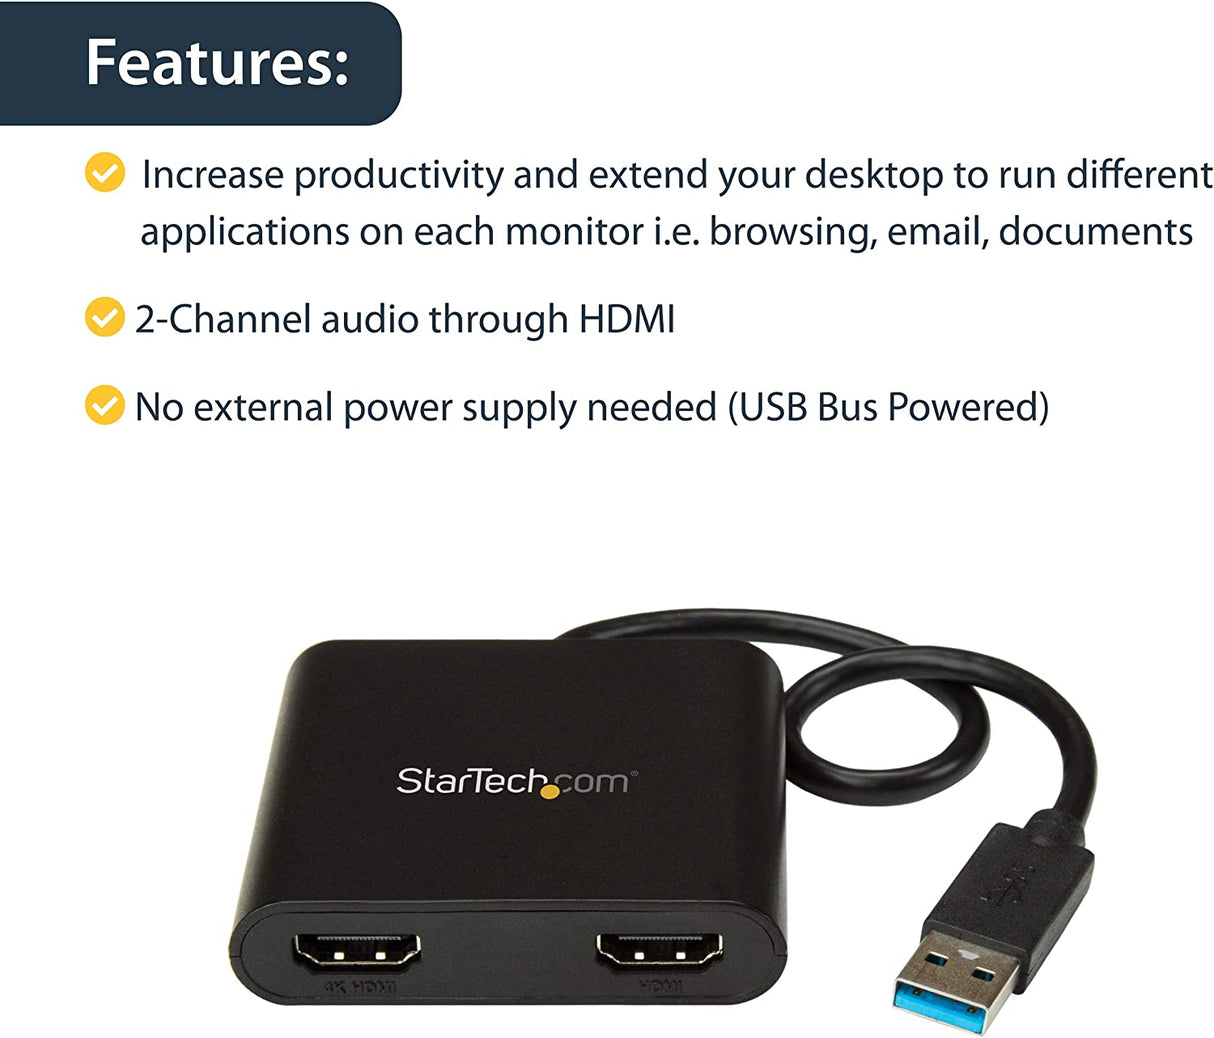 StarTech.com USB 3.0 to Dual HDMI Adapter - 1x 4K 30Hz & 1x 1080p -  External Video & Graphics Card - USB Type-A to HDMI Dual Monitor Display  Adapter Dongle - Supports